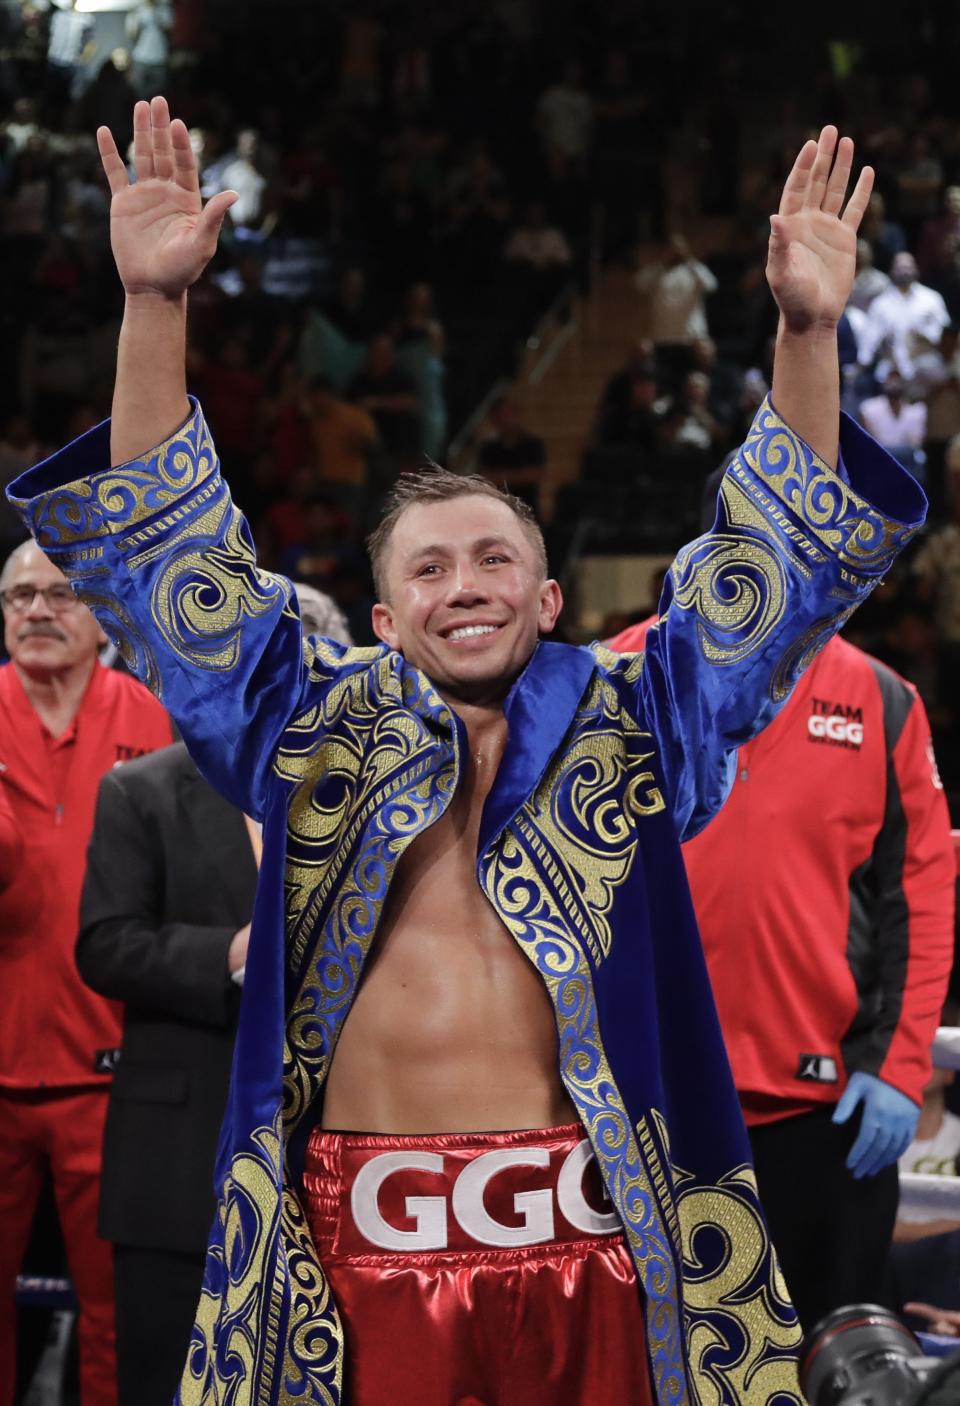 Kazakhstan's Gennady Golovkin gestures to fans after a super middleweight boxing match against Canada's Steve Rolls on Saturday, June 8, 2019, in New York. Golovkin won in the fourth round. (AP Photo/Frank Franklin II)